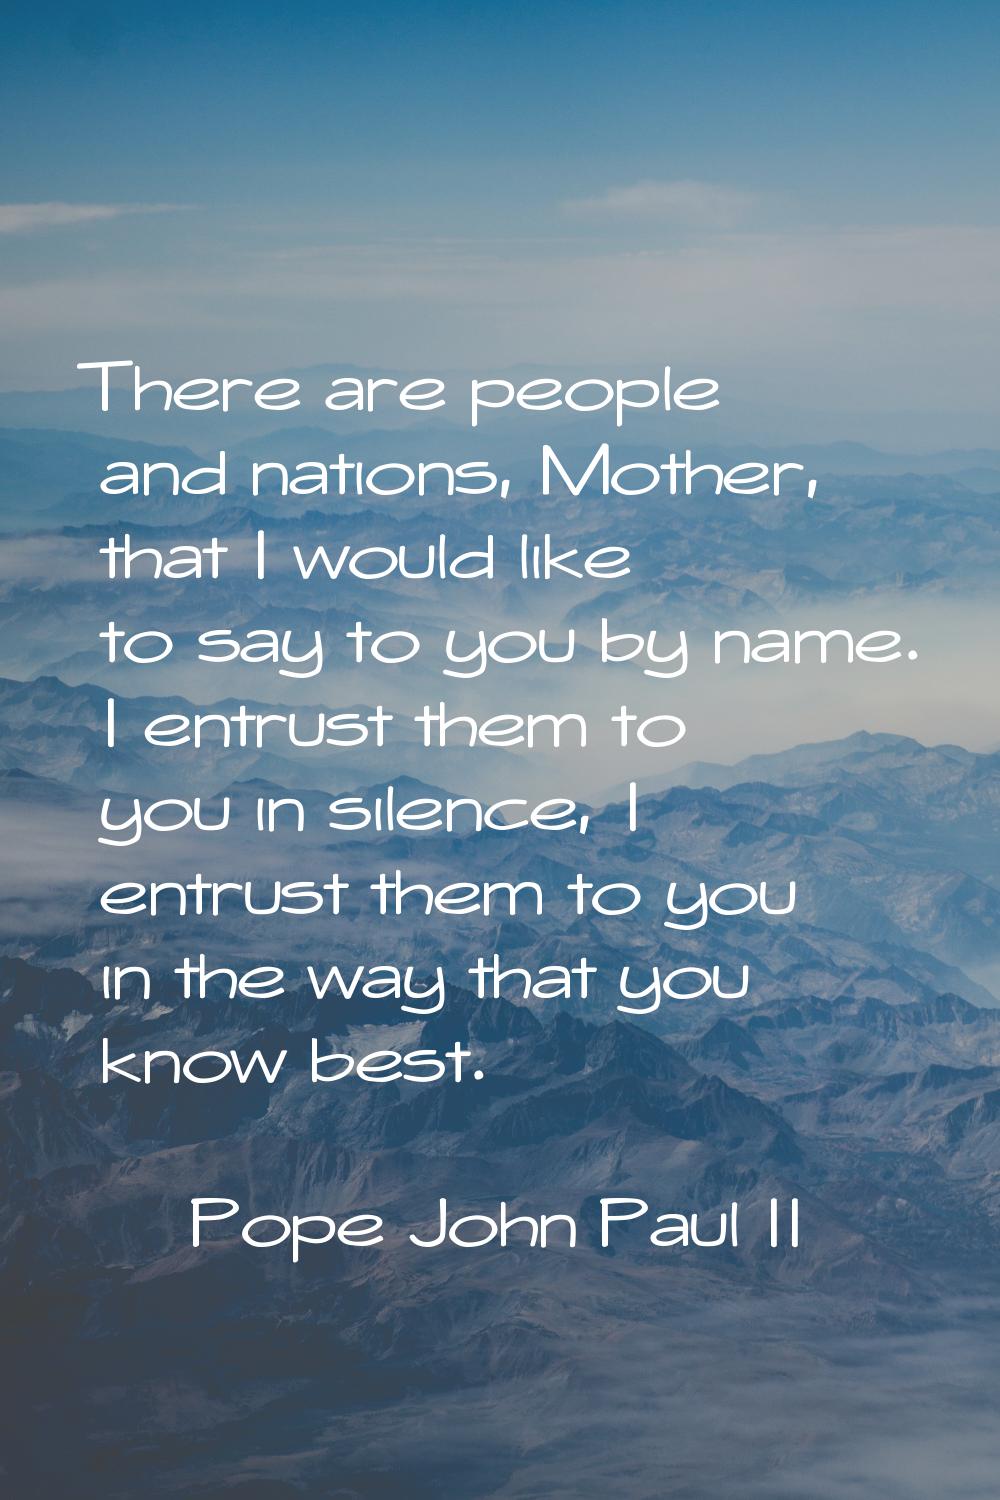 There are people and nations, Mother, that I would like to say to you by name. I entrust them to yo